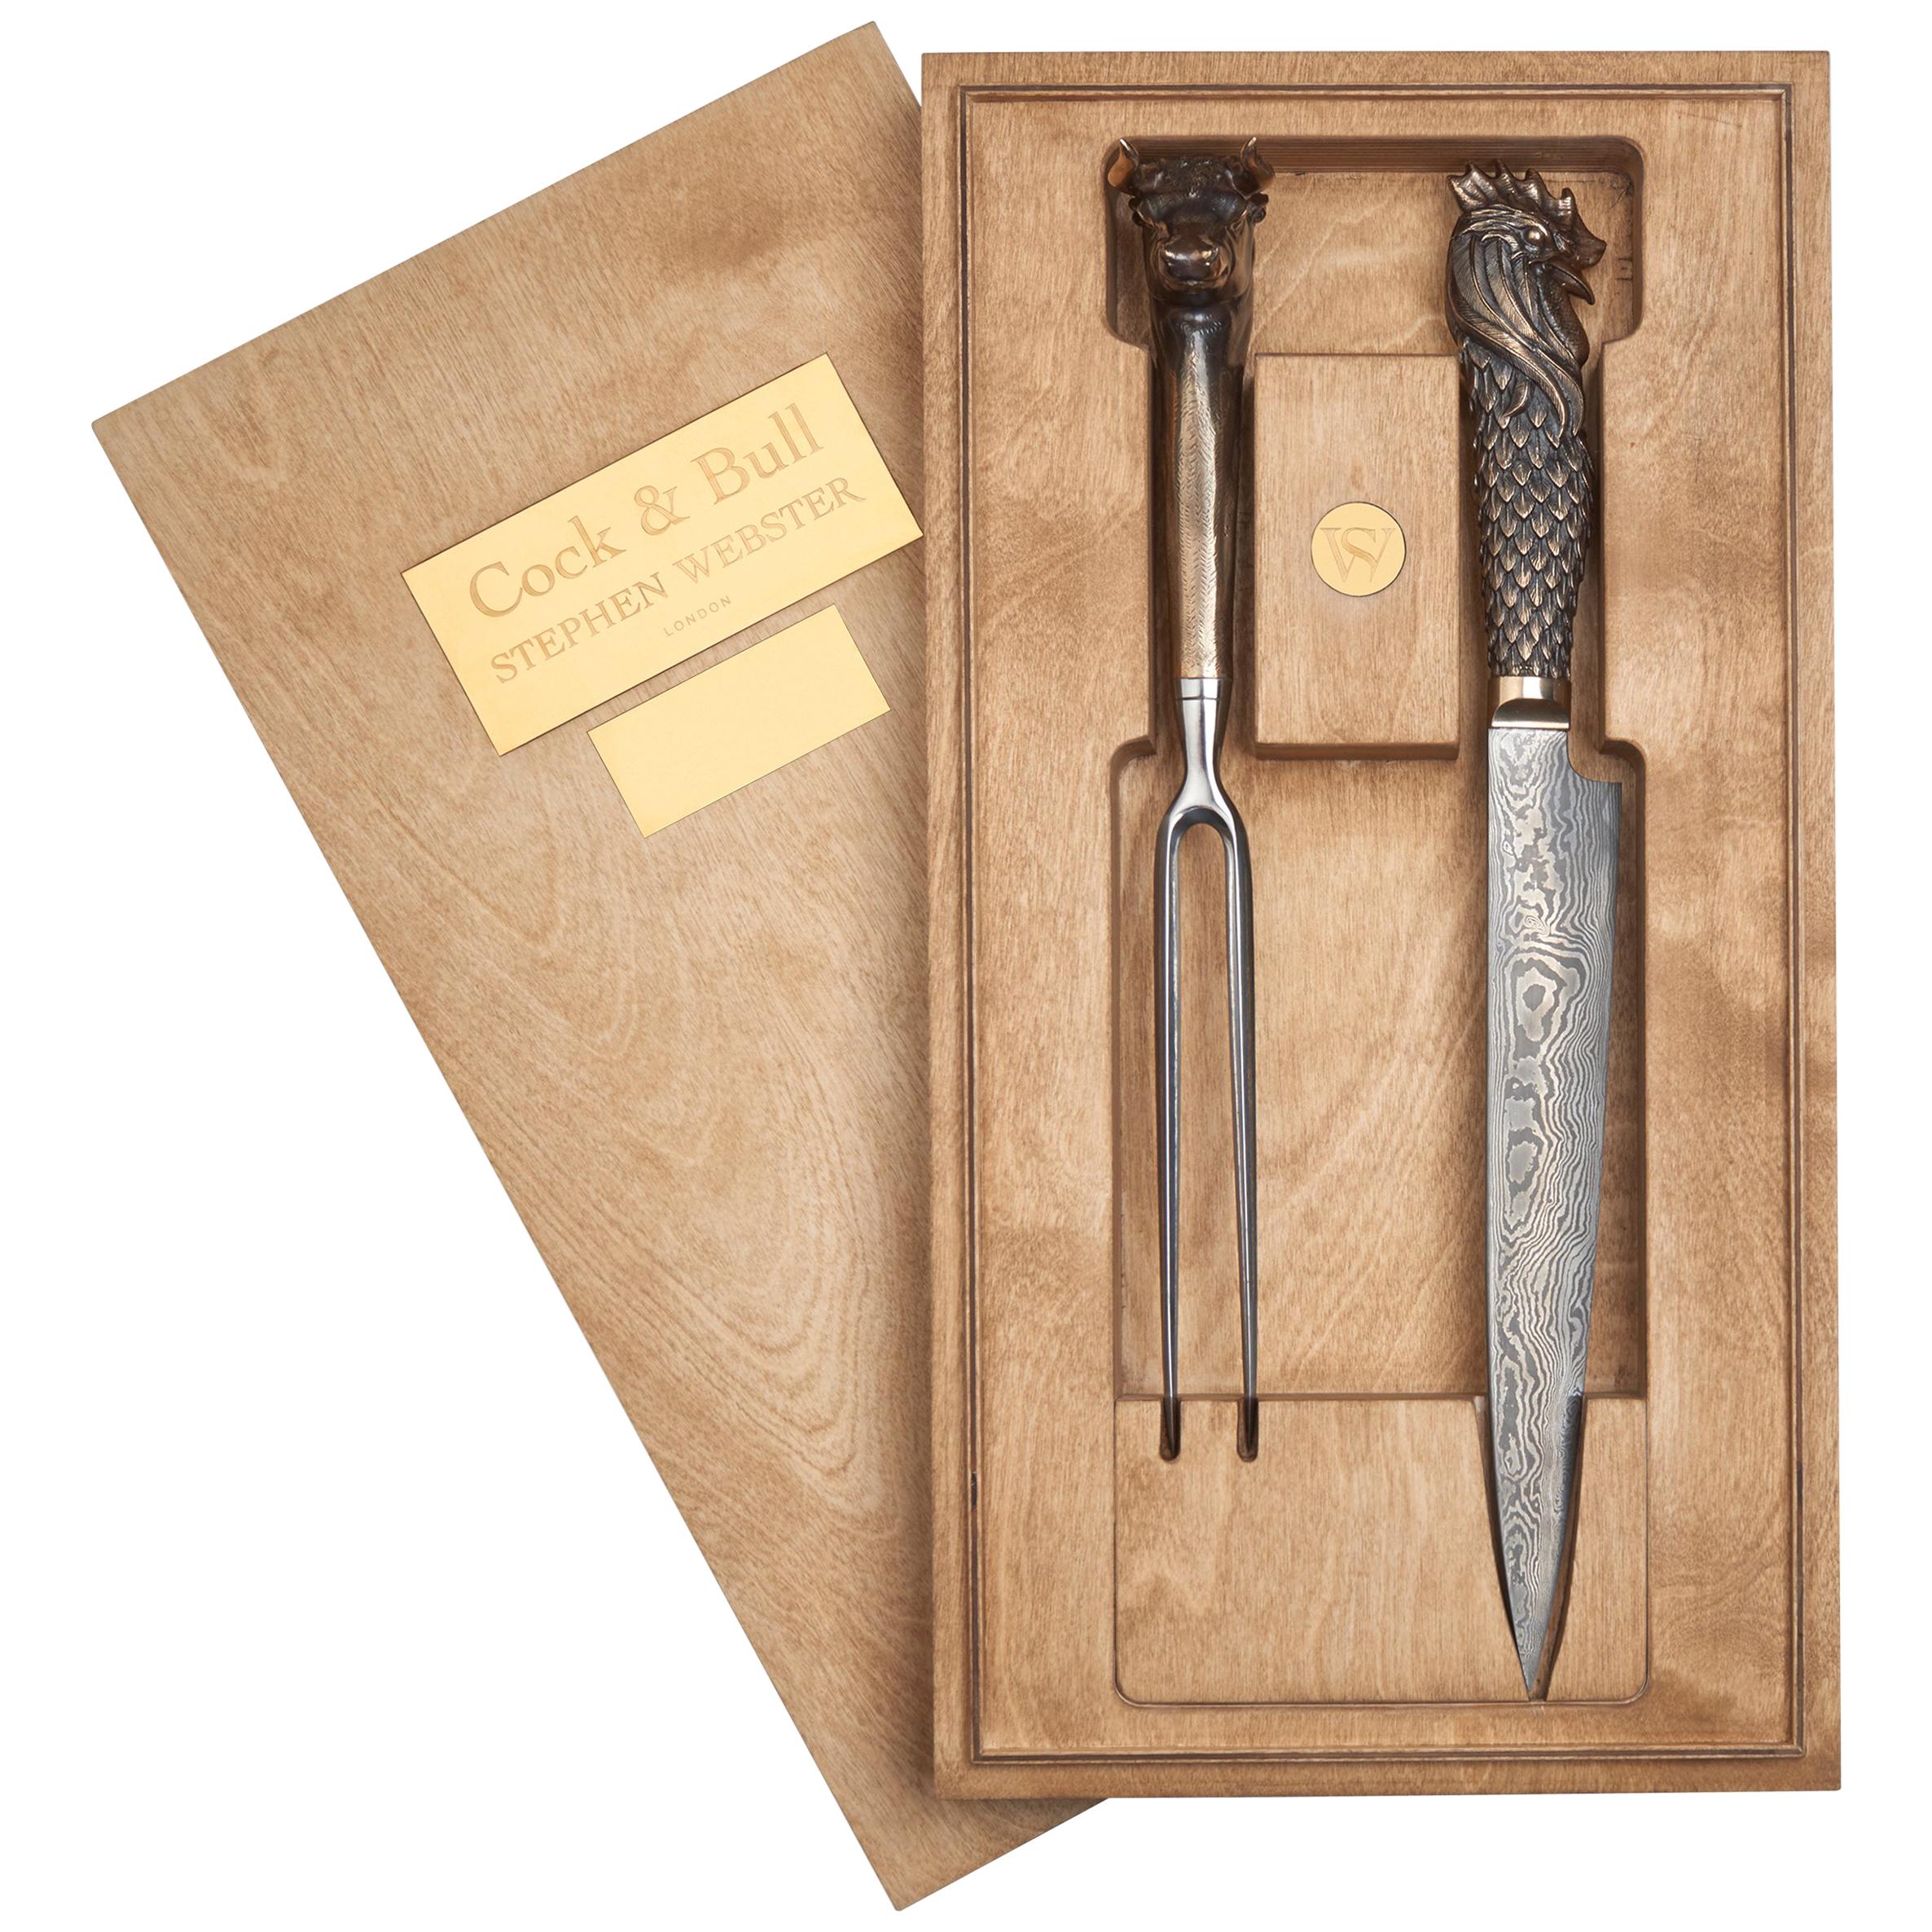 Stephen Webster Cock & Bull Carving Knives with Steel Blades and Bronze Handles